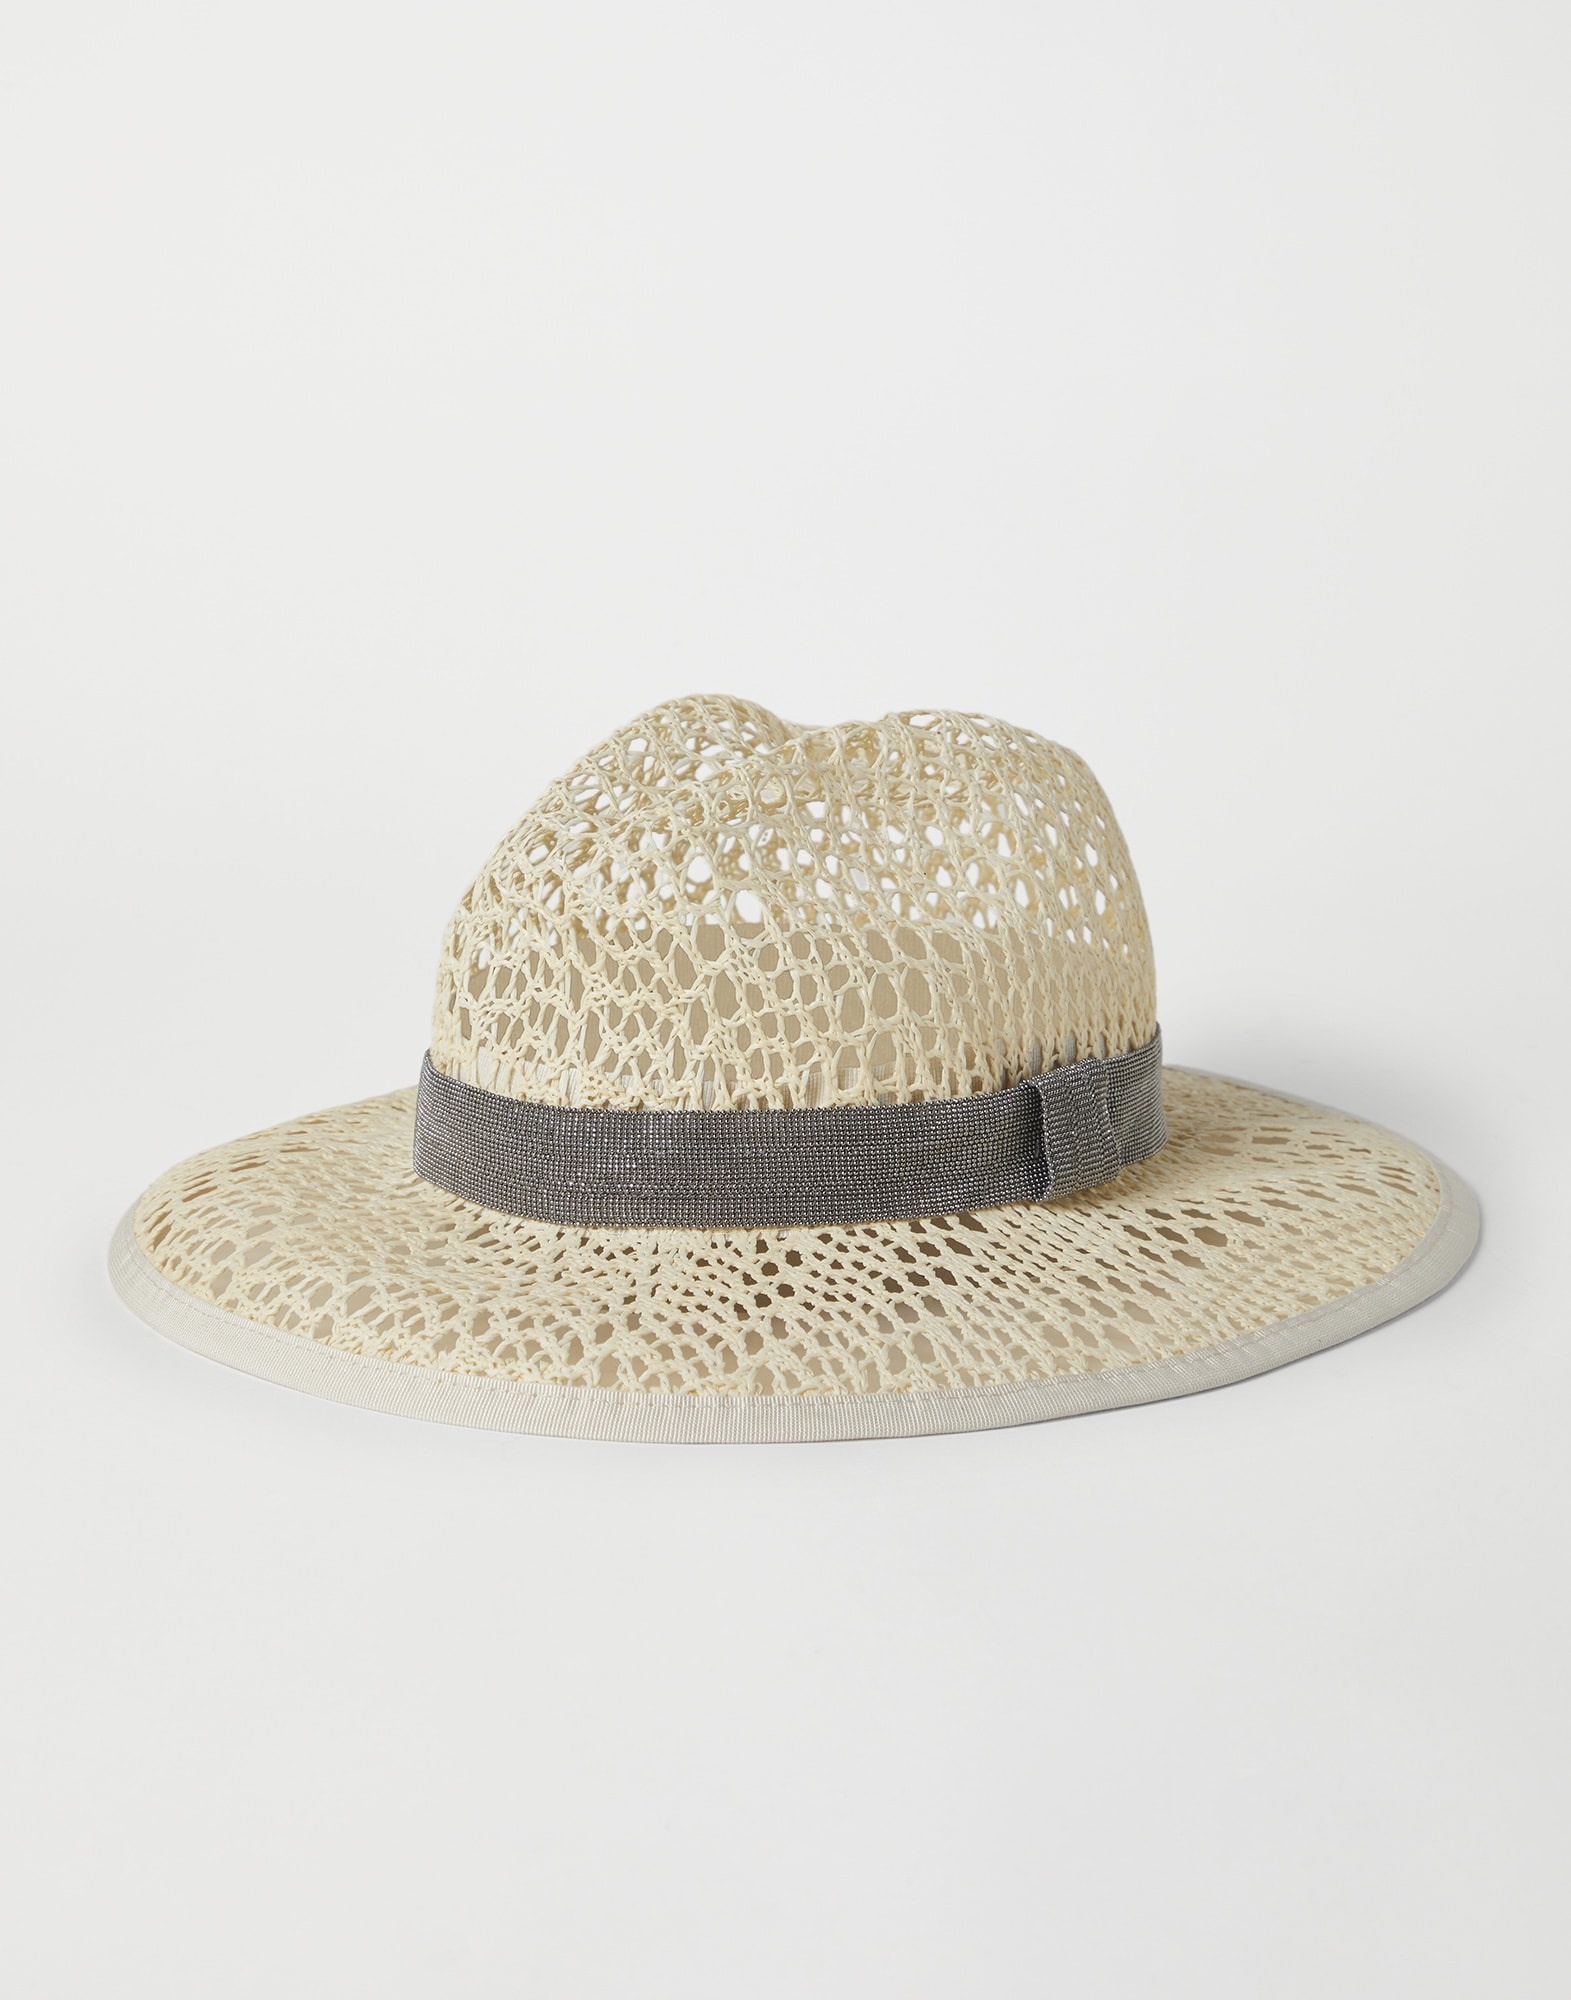 Straw hat with precious band - 1